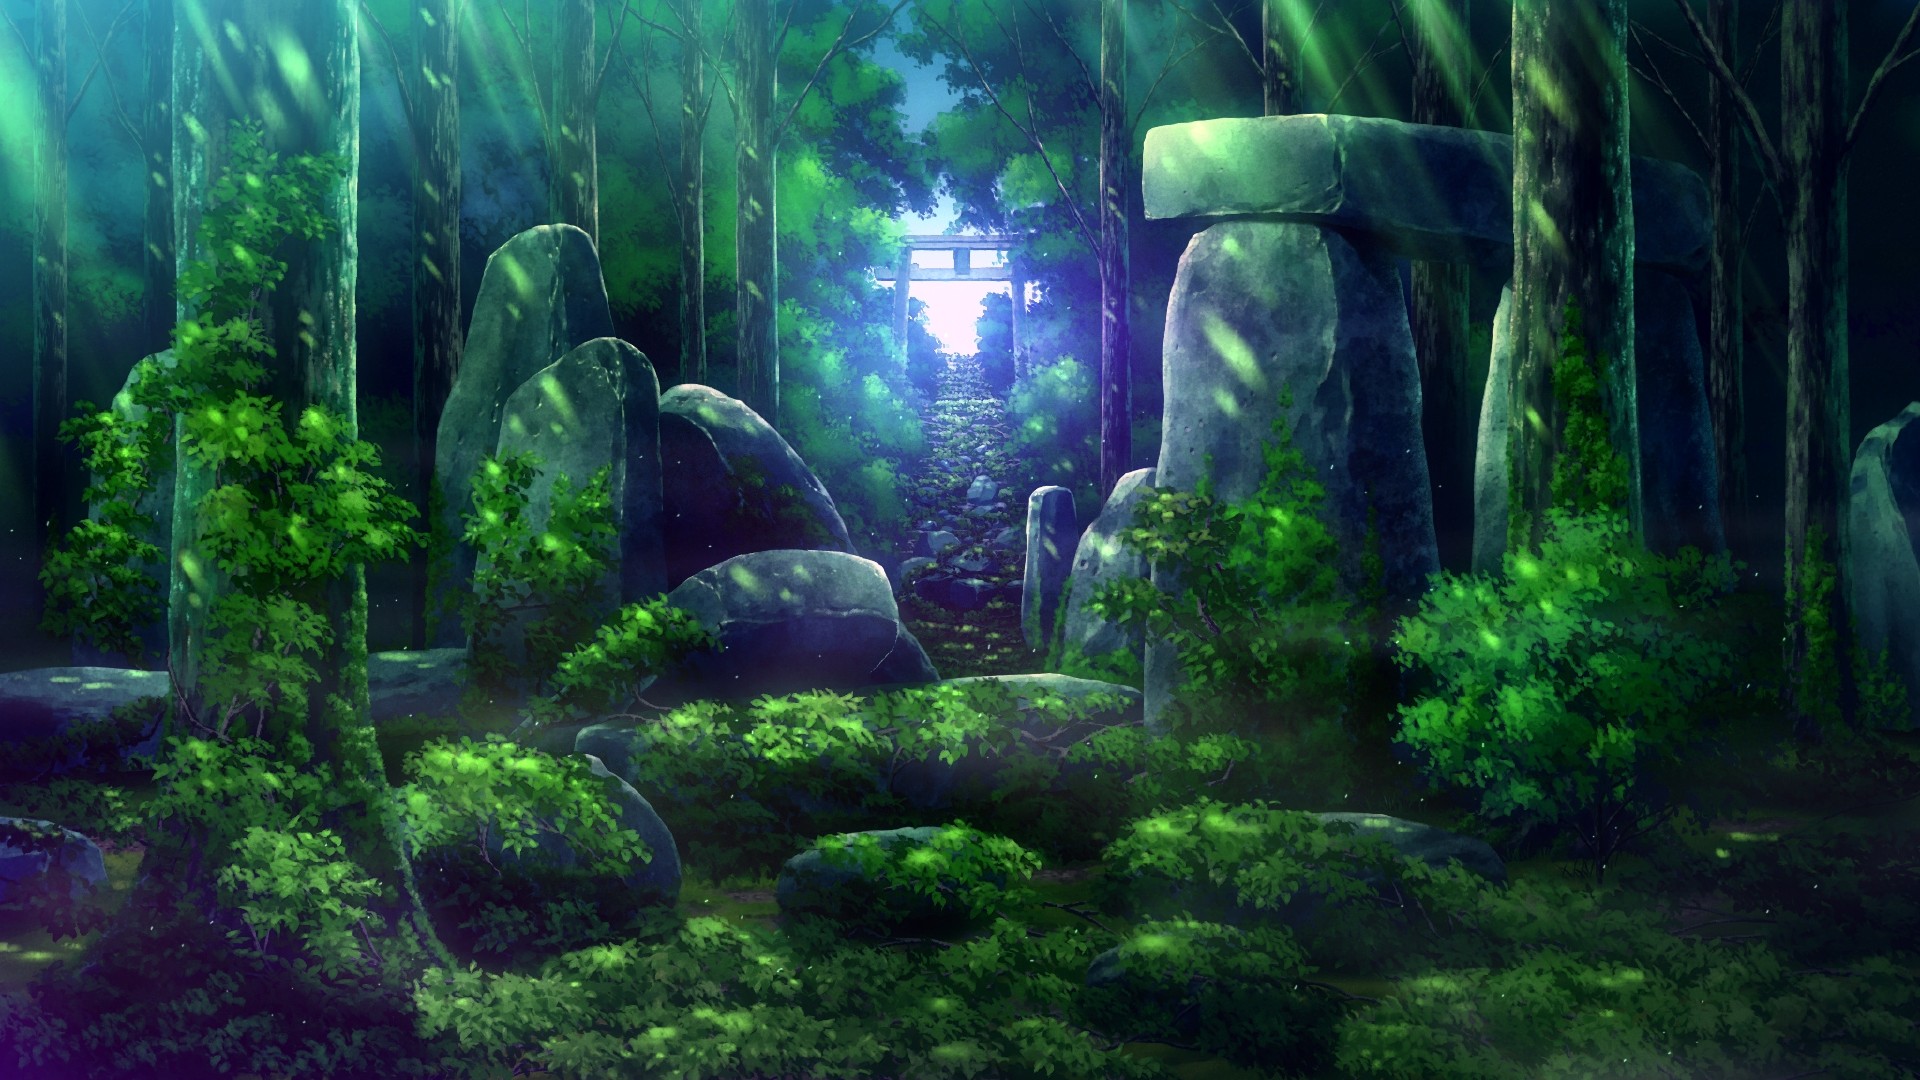 ANIME SCENERY #2]THE FOREST by RiKah-ARMY on DeviantArt